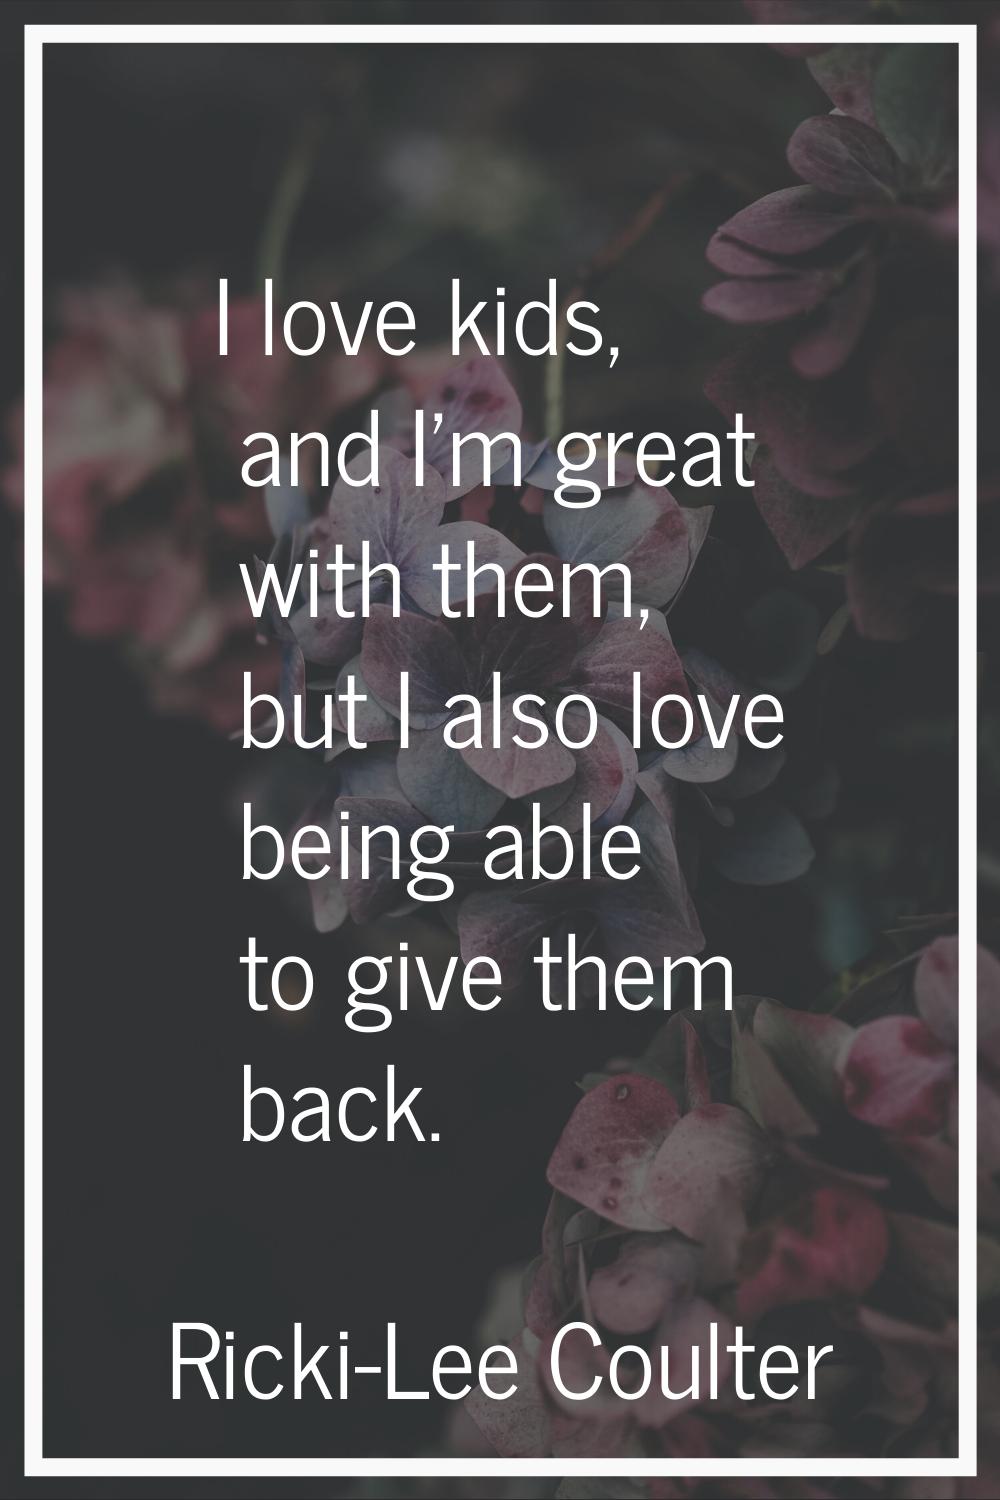 I love kids, and I'm great with them, but I also love being able to give them back.